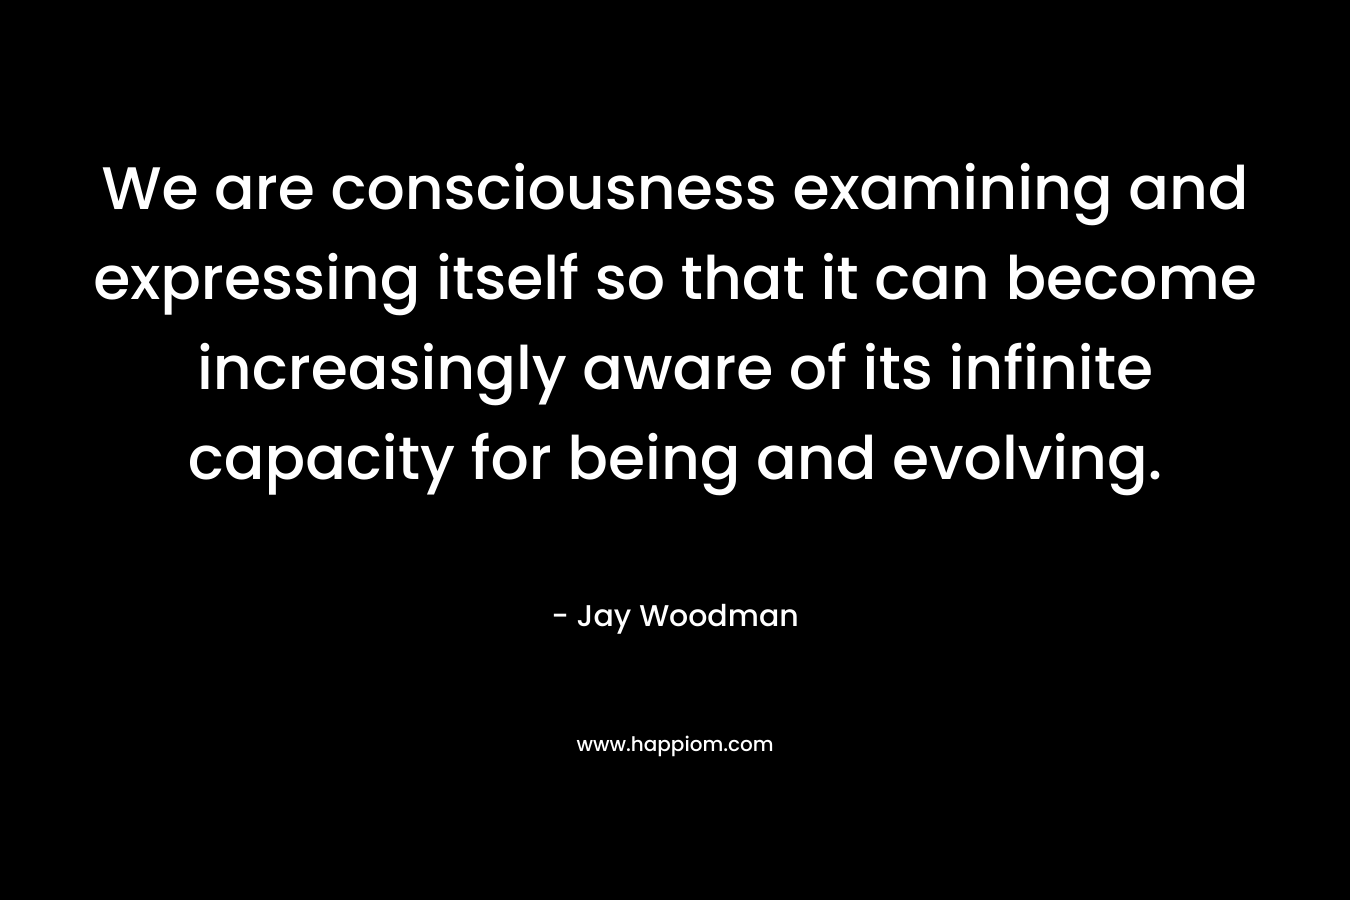 We are consciousness examining and expressing itself so that it can become increasingly aware of its infinite capacity for being and evolving.